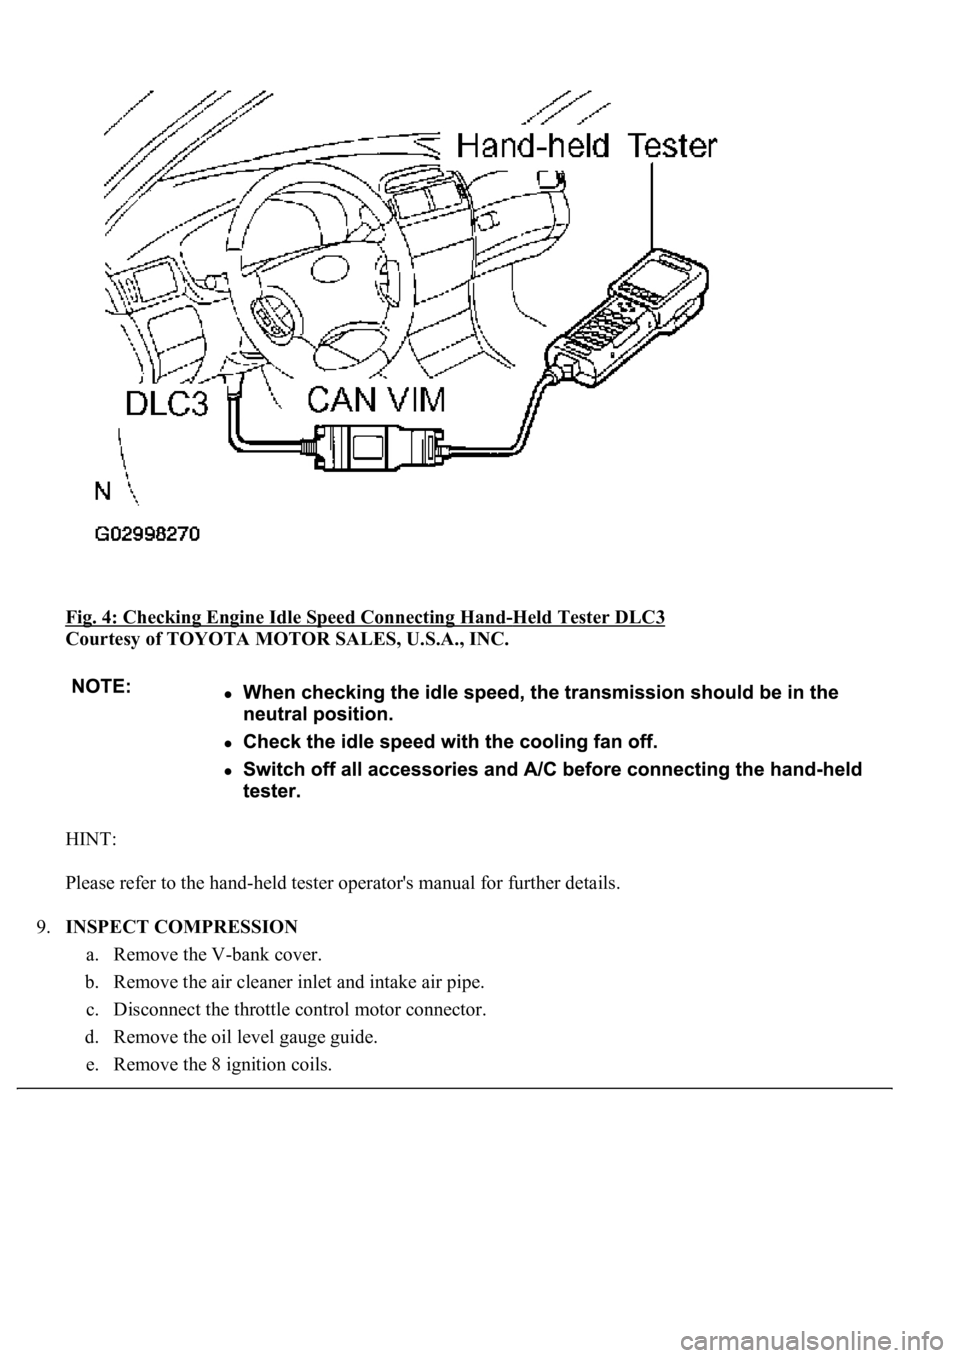 LEXUS LS430 2003  Factory Repair Manual Fig. 4: Checking Engine Idle Speed Connecting Hand-Held Tester DLC3 
Courtesy of TOYOTA MOTOR SALES, U.S.A., INC. 
HINT: 
Please refer to the hand-held tester operator's manual for further details